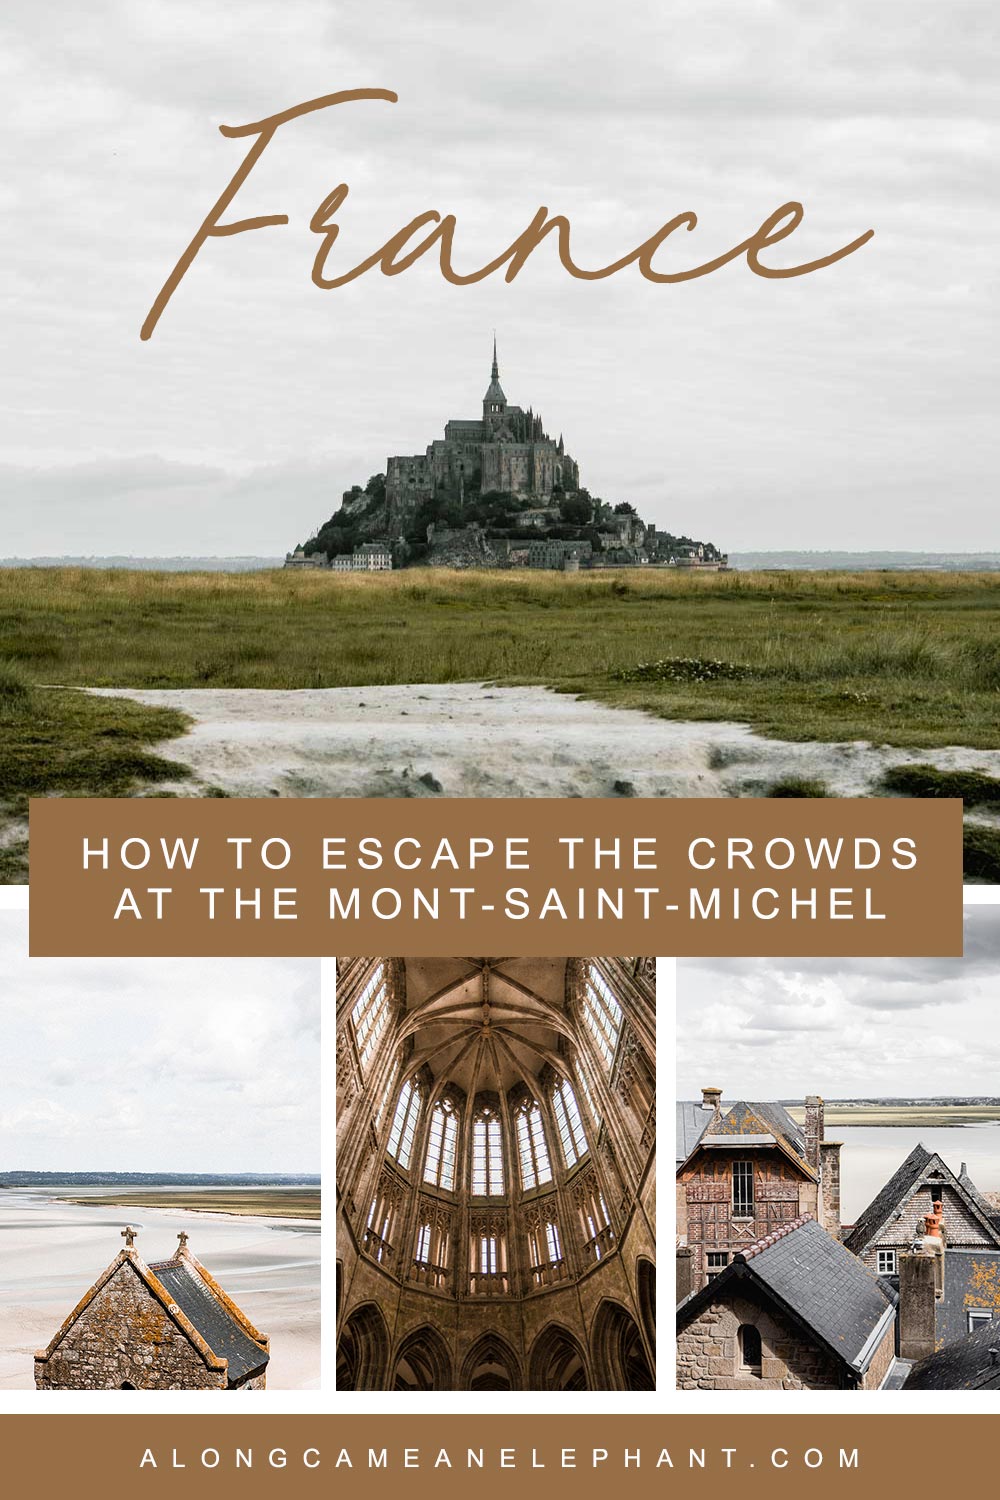 A perfect trip to the Mont-Saint-Michel, France. While this mysterious island attracts millions of visitors each year, it can be tough to appreciate its beauty through the crowds. Here's out perfect Mont-Saint-Michel itinerary to avoid the crowds! #france #montsaintmichel #francetravel #franceitinerary